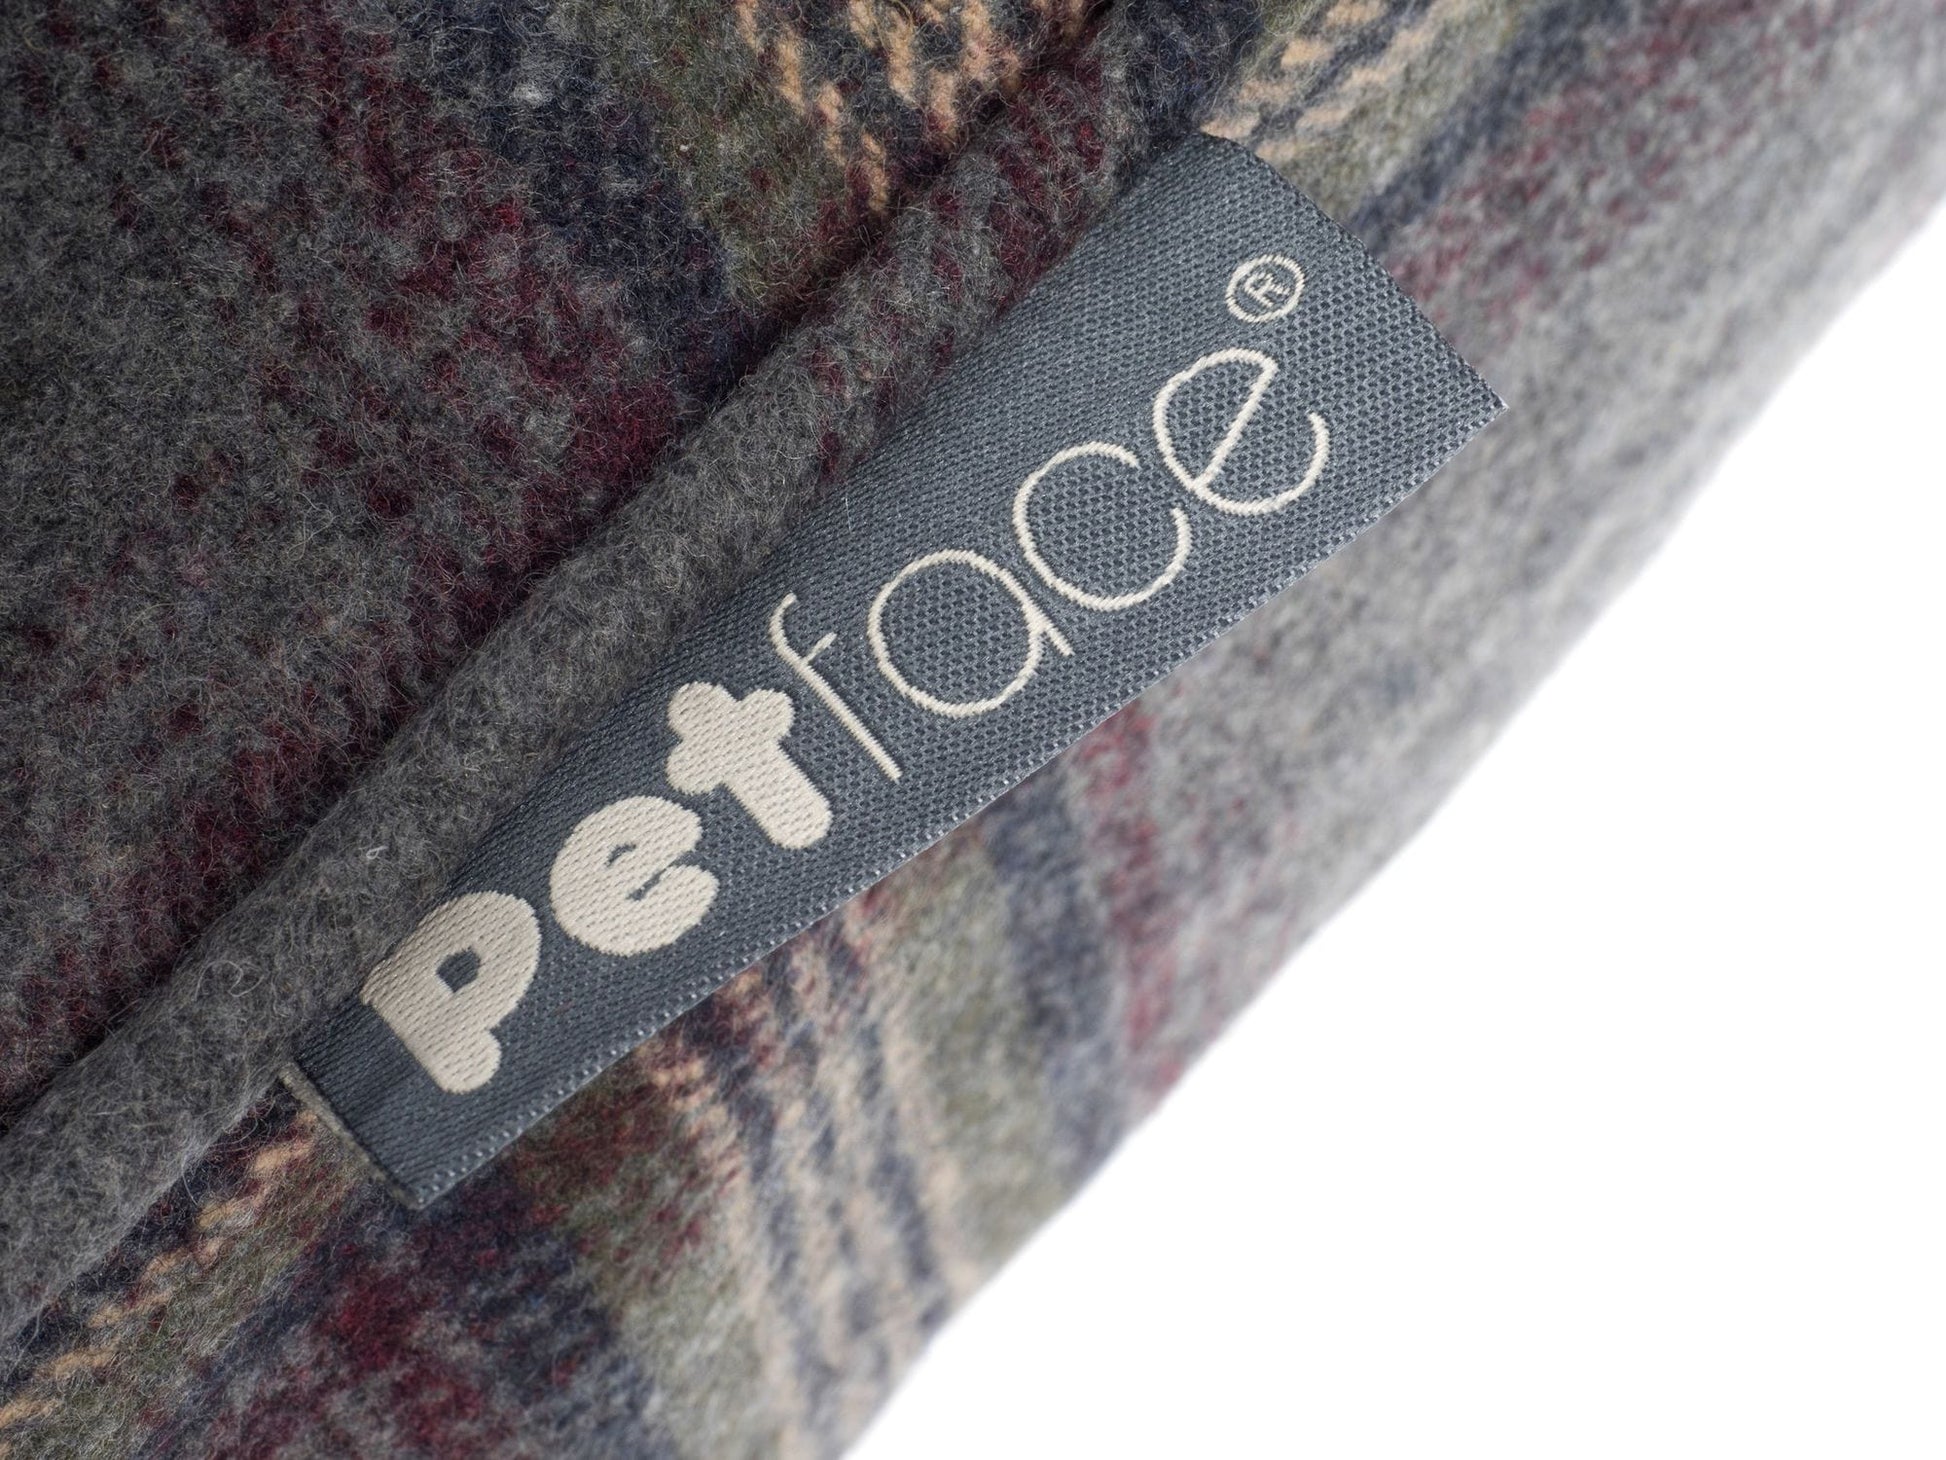 Petface tab on seam of pillow mattress dog bed, medium size in a grey tweed pattern.